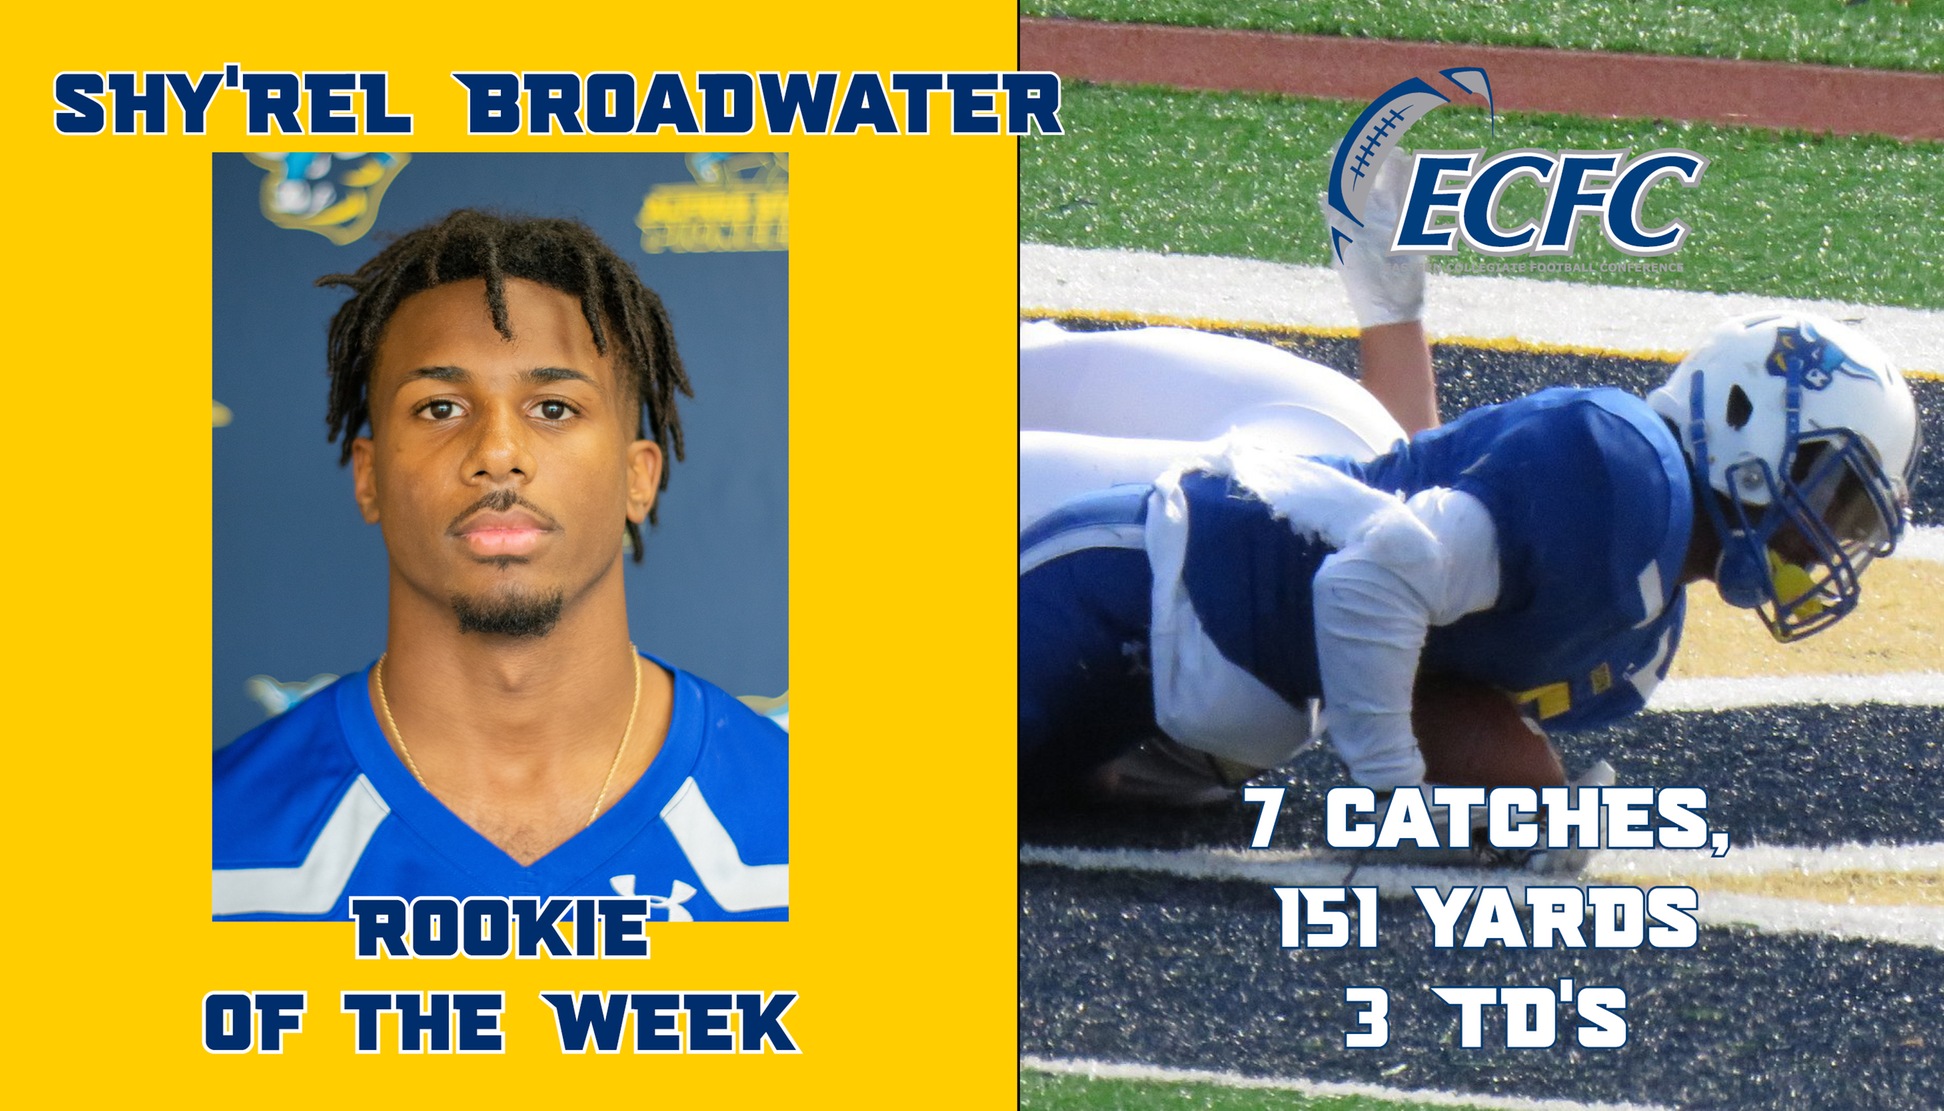 Shy'rel Broadwater named ECFC Rookie of the Week